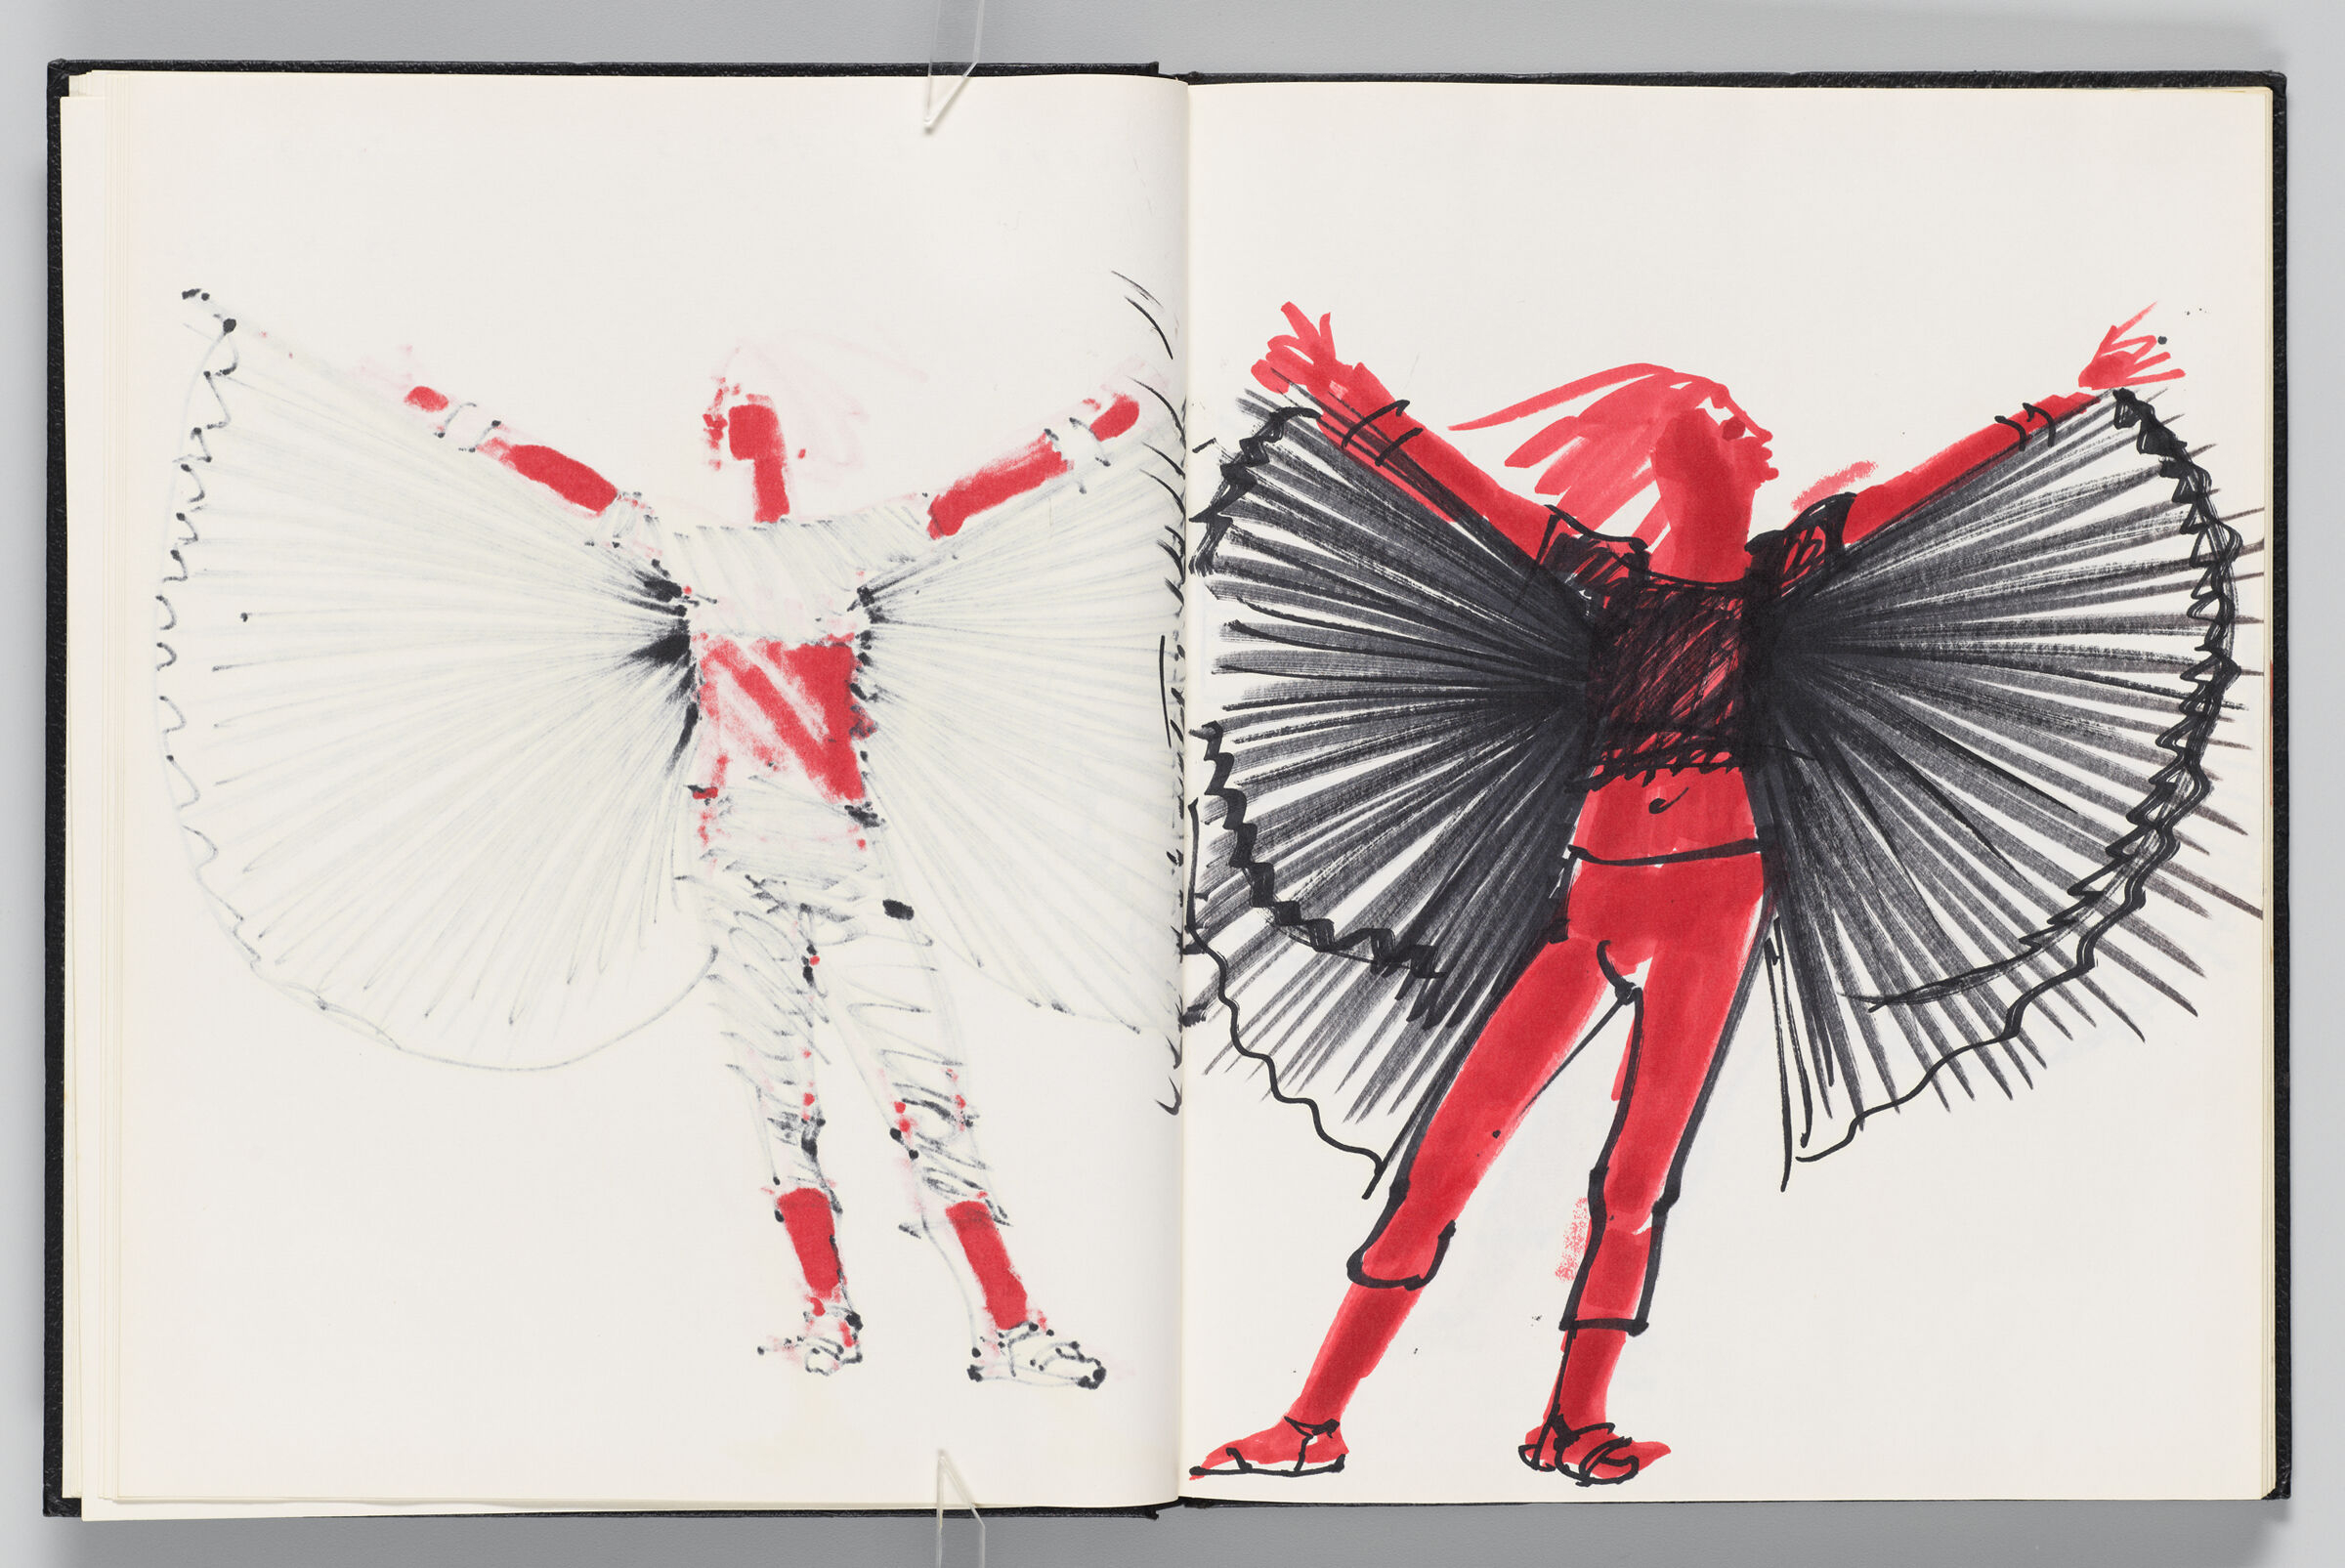 Untitled (Bleed-Through Of Previous Page And Icarus Costume, Two-Page Spread)